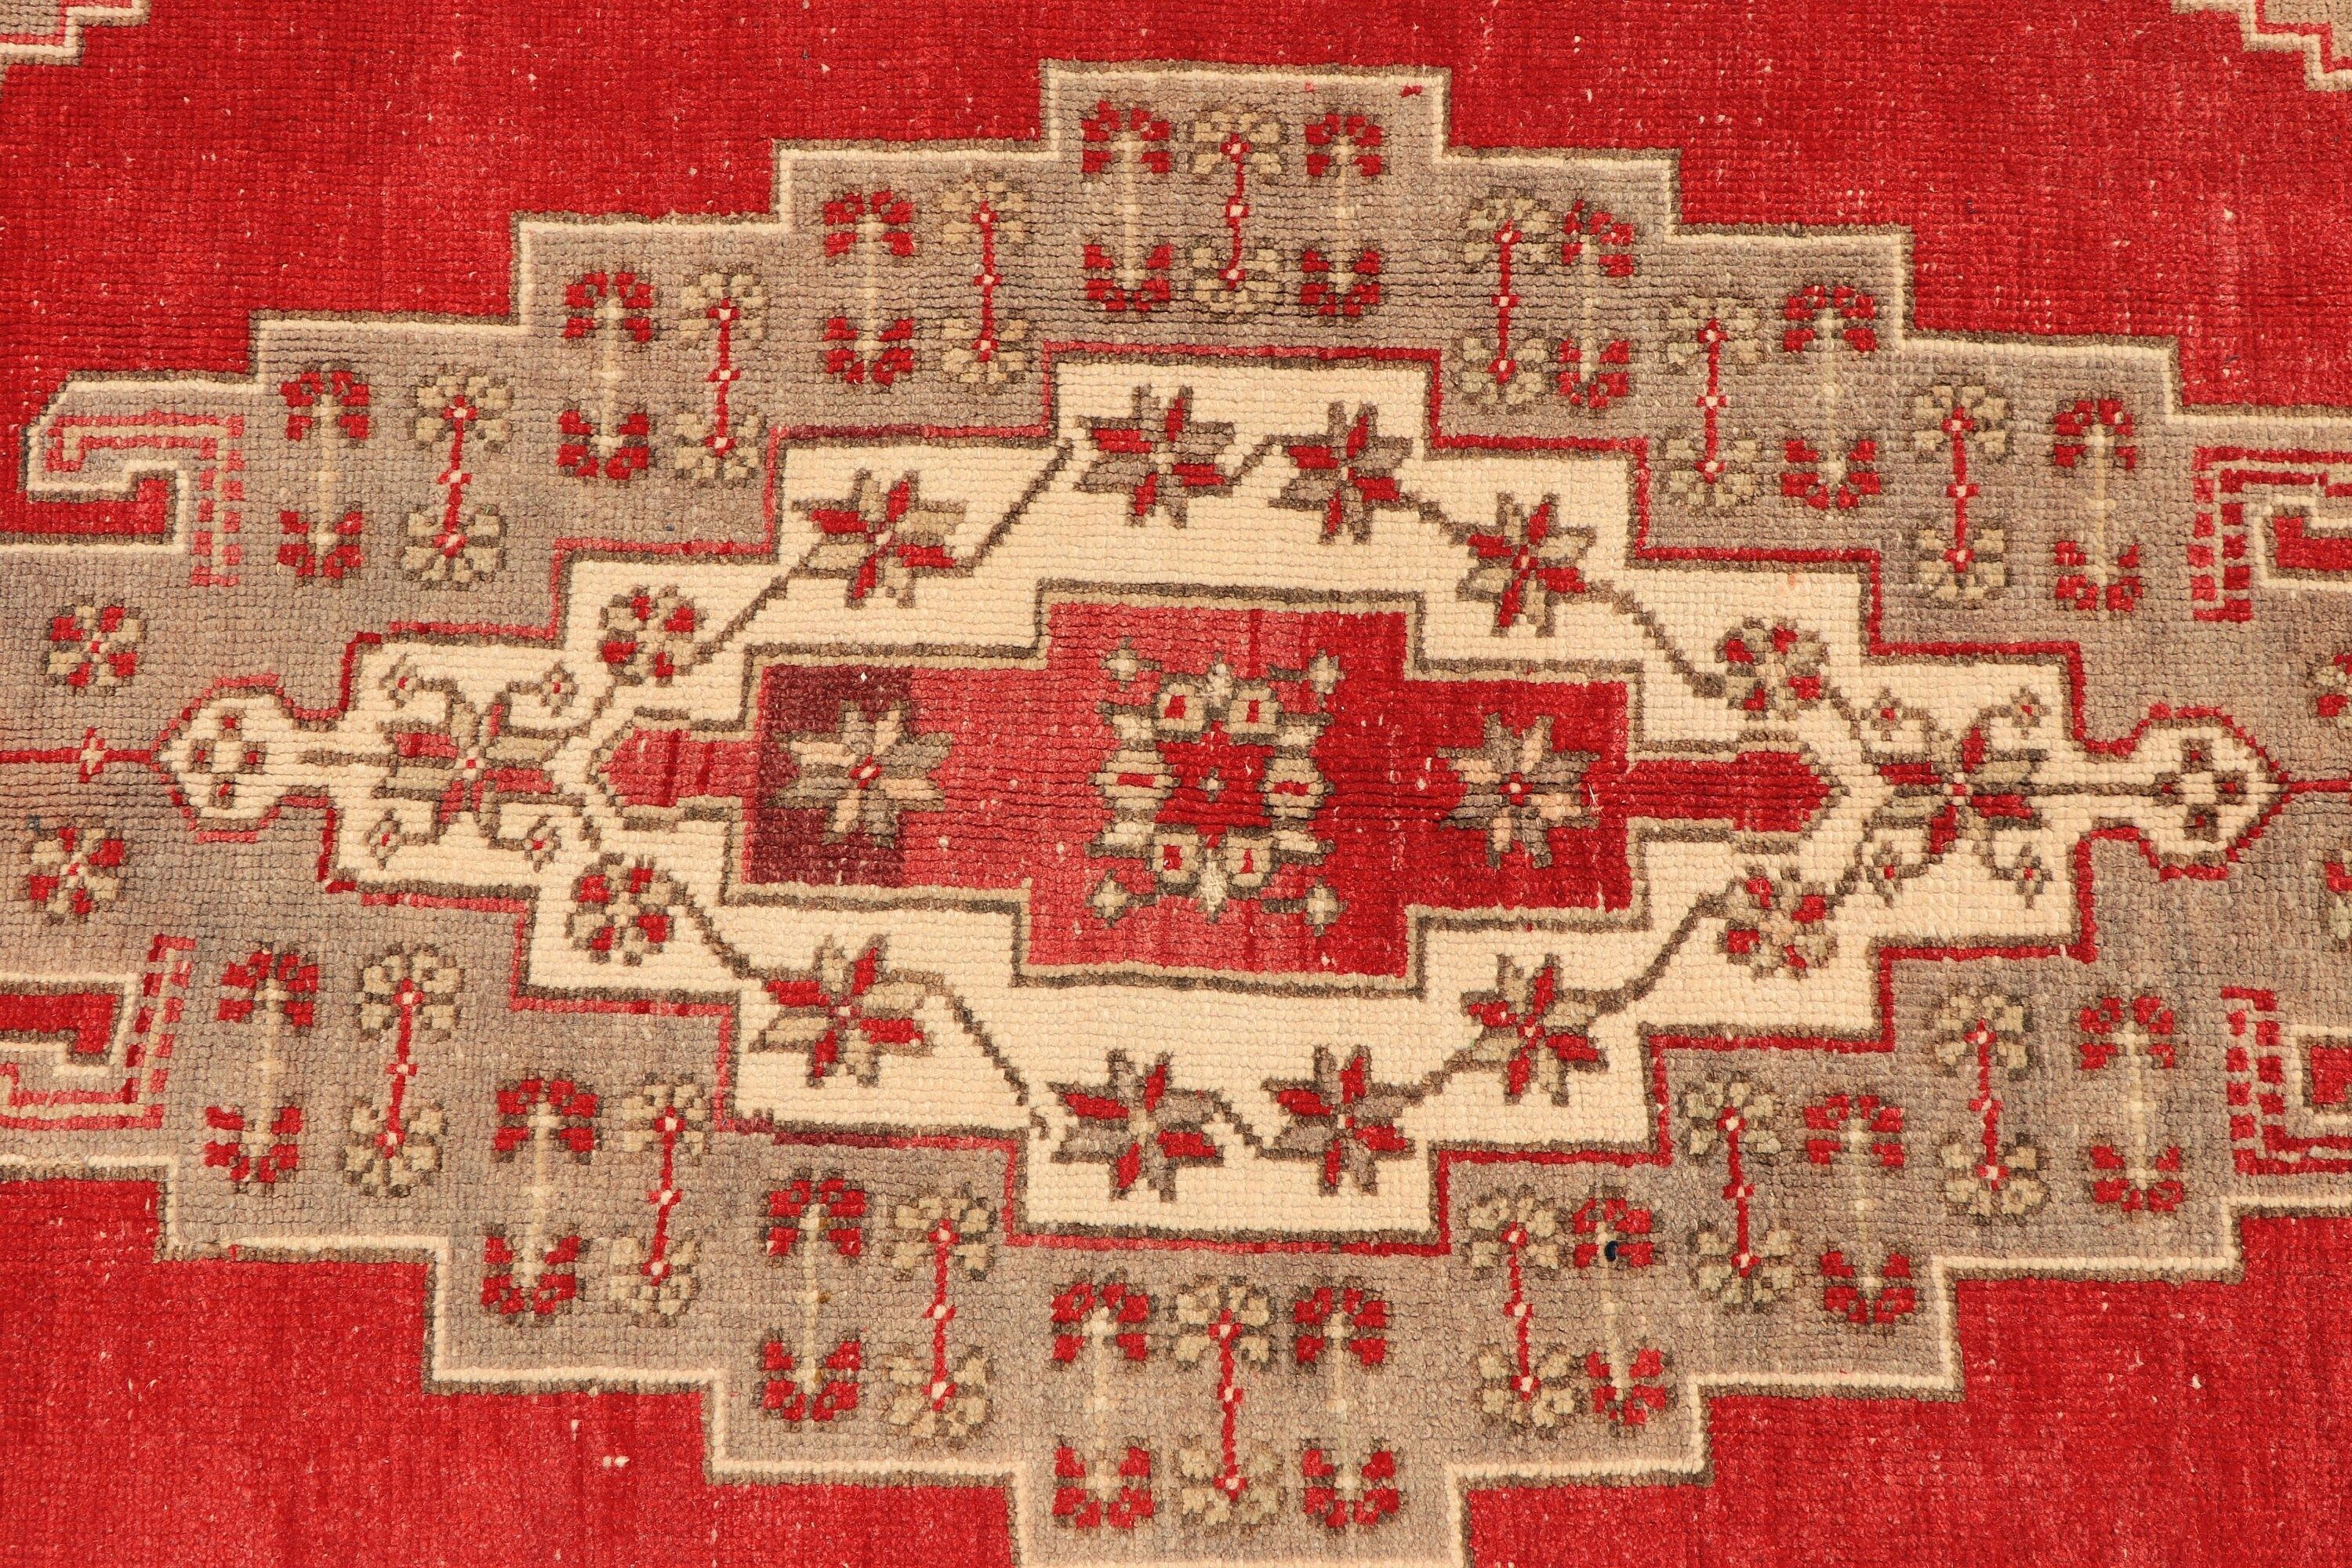 4.8x10.1 ft Large Rug, Rugs for Dining Room, Red Bedroom Rugs, Turkish Rugs, Vintage Rug, Anatolian Rugs, Moroccan Rug, Dining Room Rug